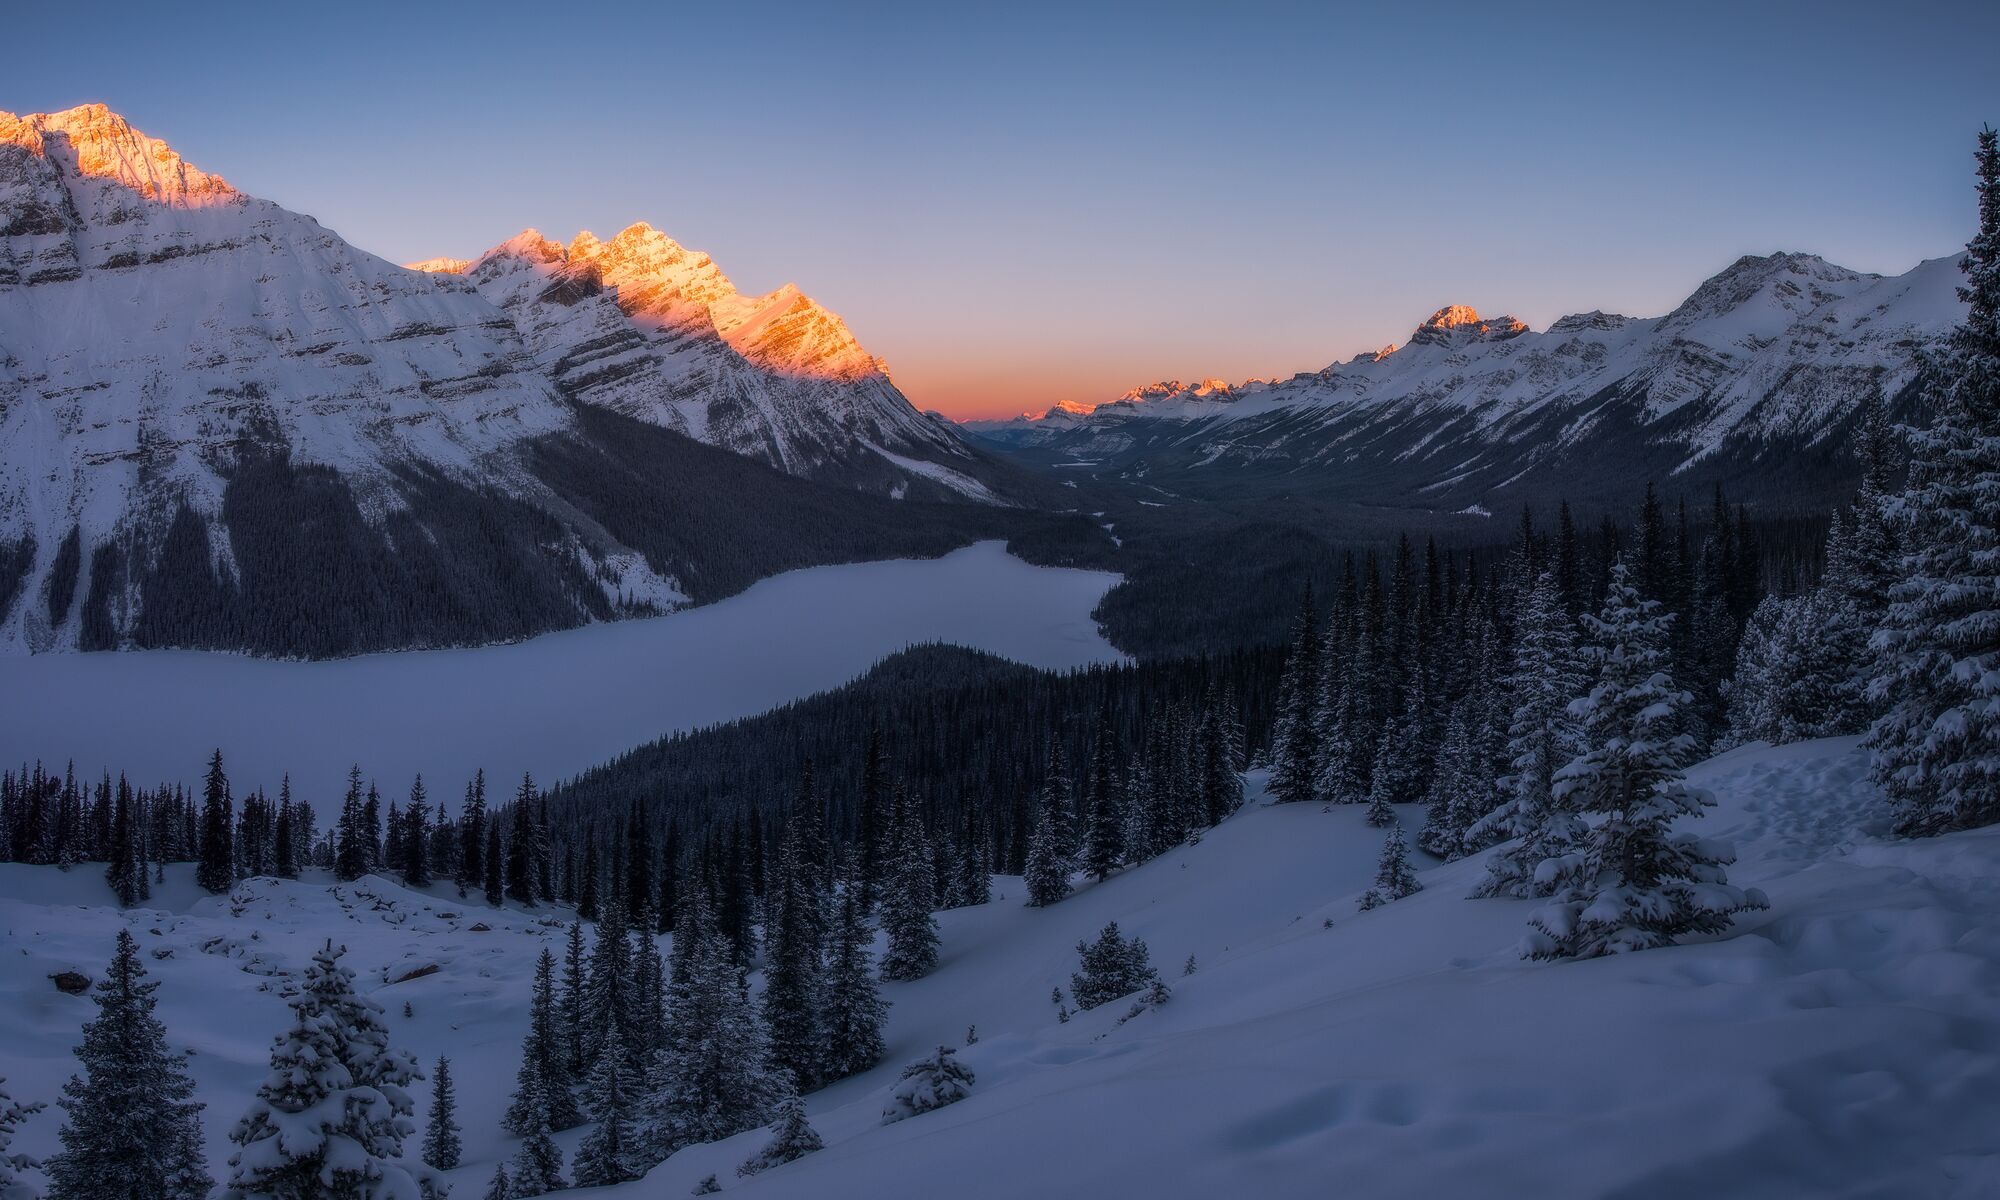 Peyto Lake at sunrise on a winter expedition with Radventures in Banff National Park.